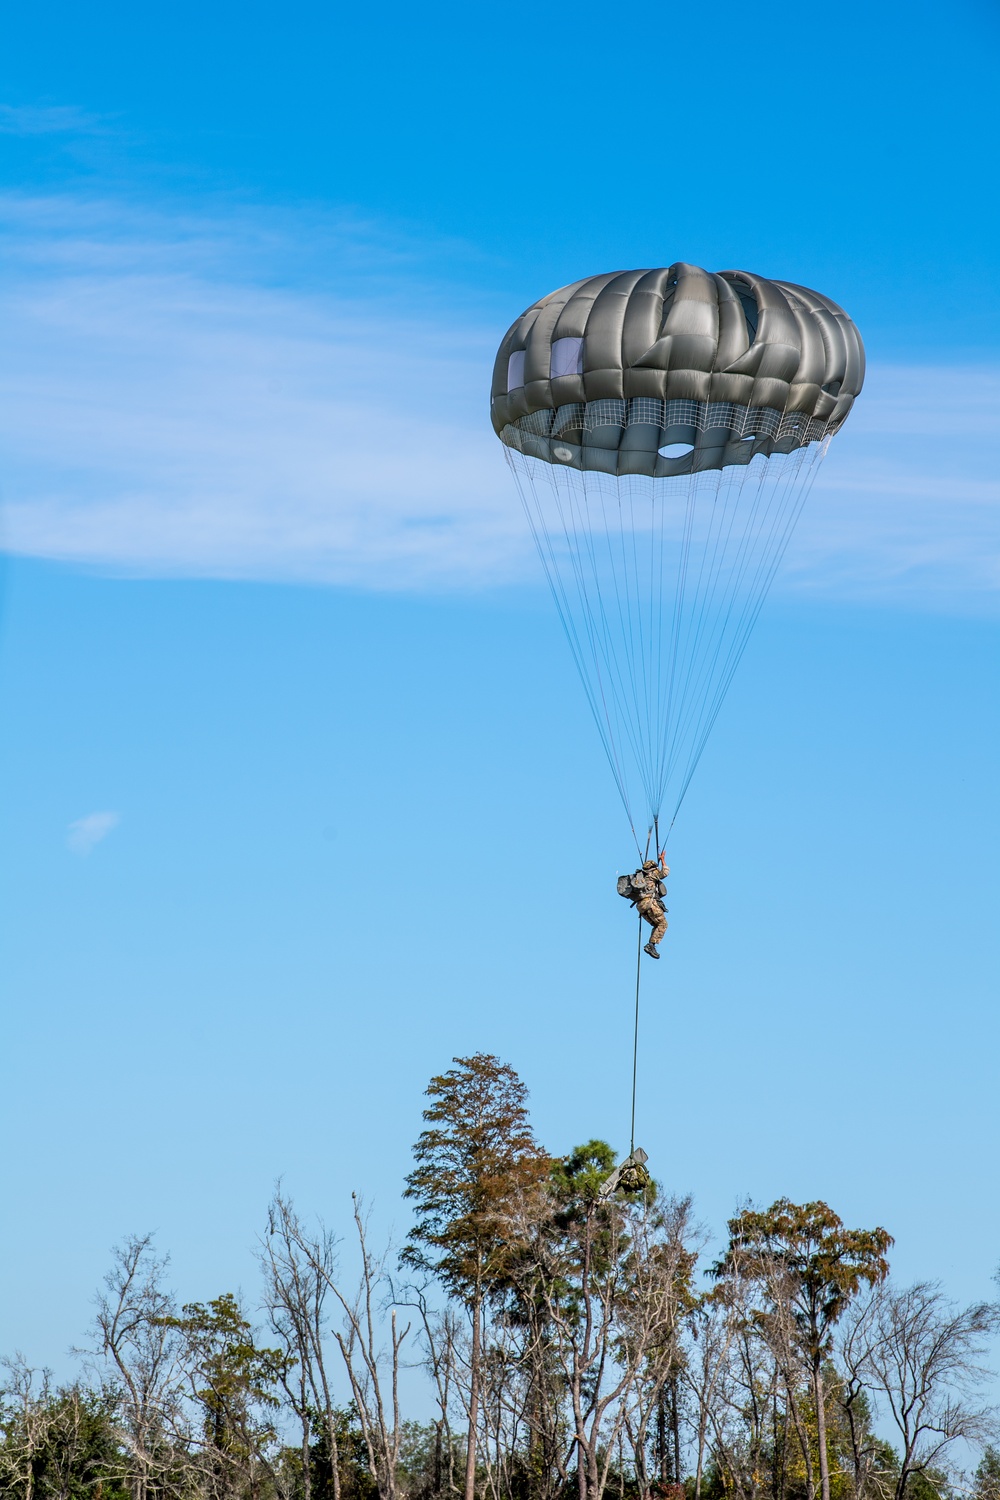 Air Force and Army Airborne Operation Training